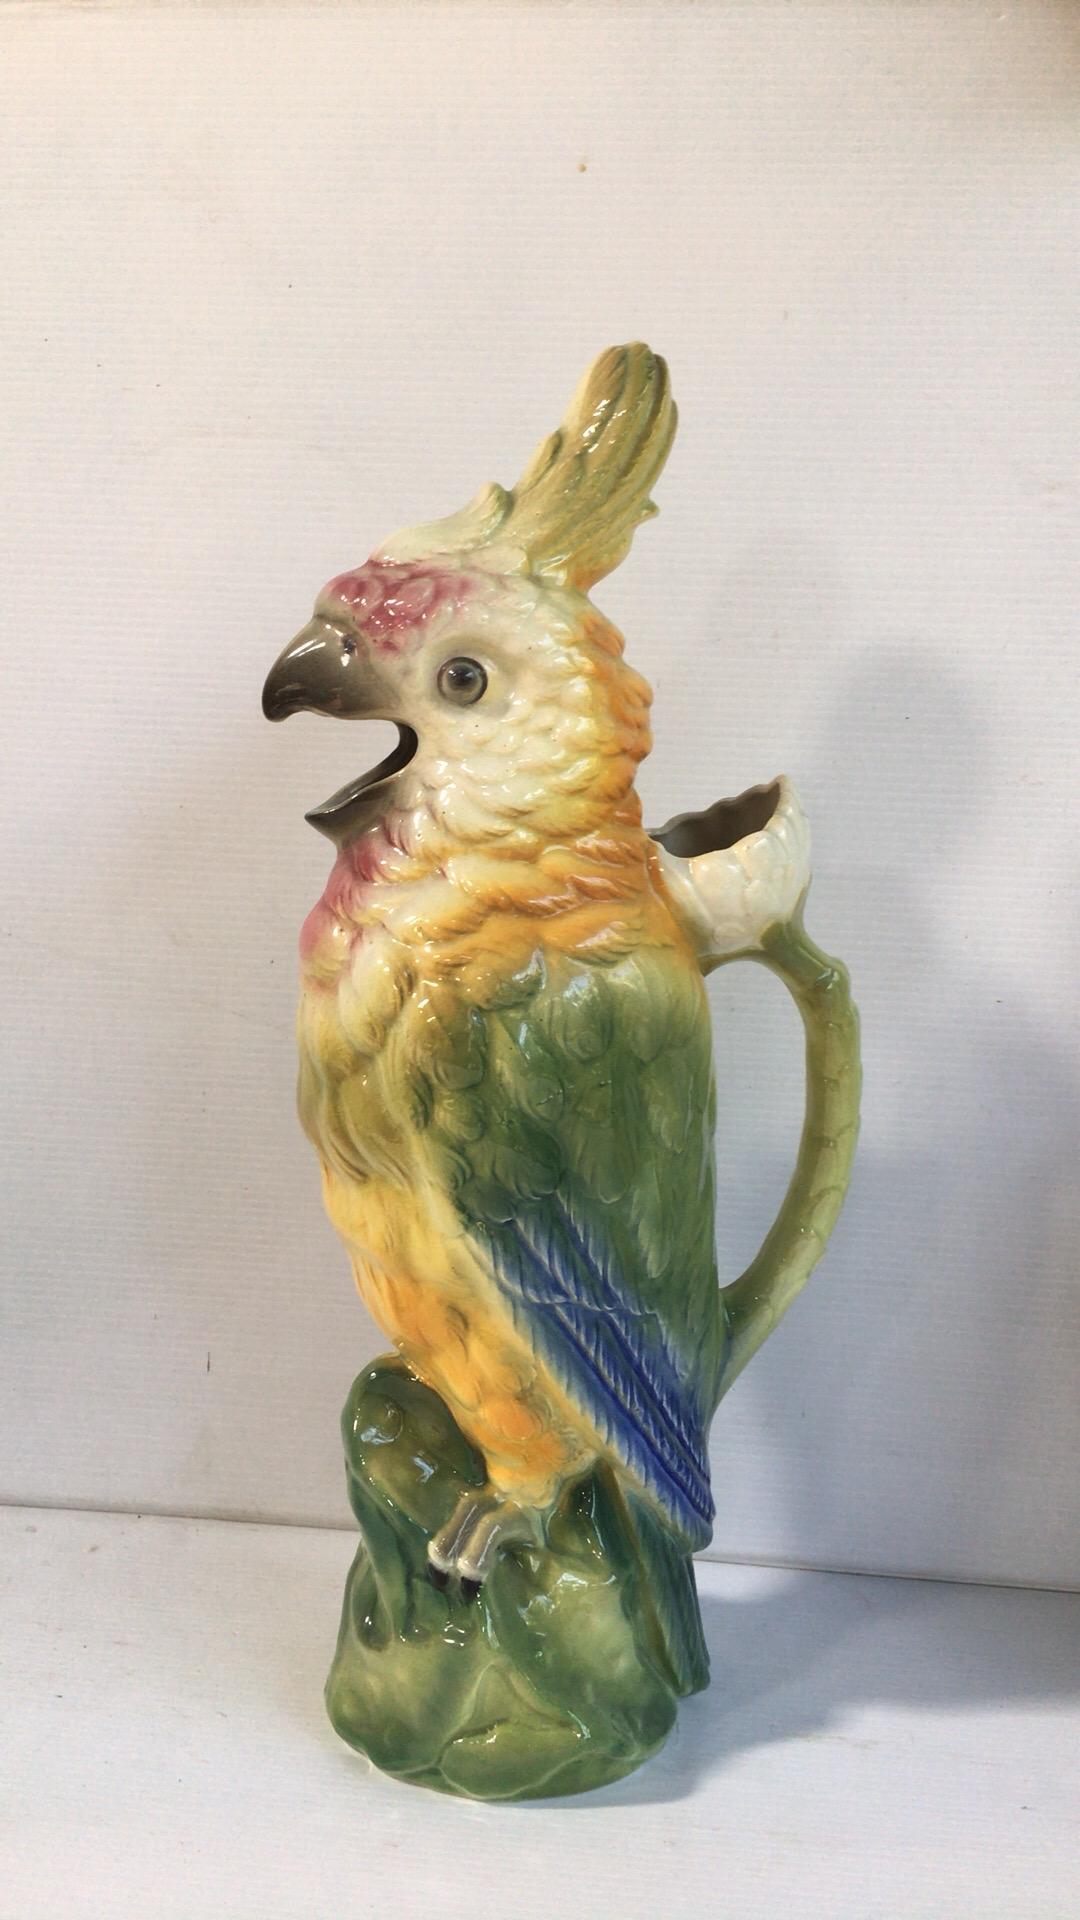 Oversized French Majolica parrot pitcher signed Keller and Guerin Saint Clement, circa 1900.
Original older model.
Rare Size.
Measures: Height / 16 inches.